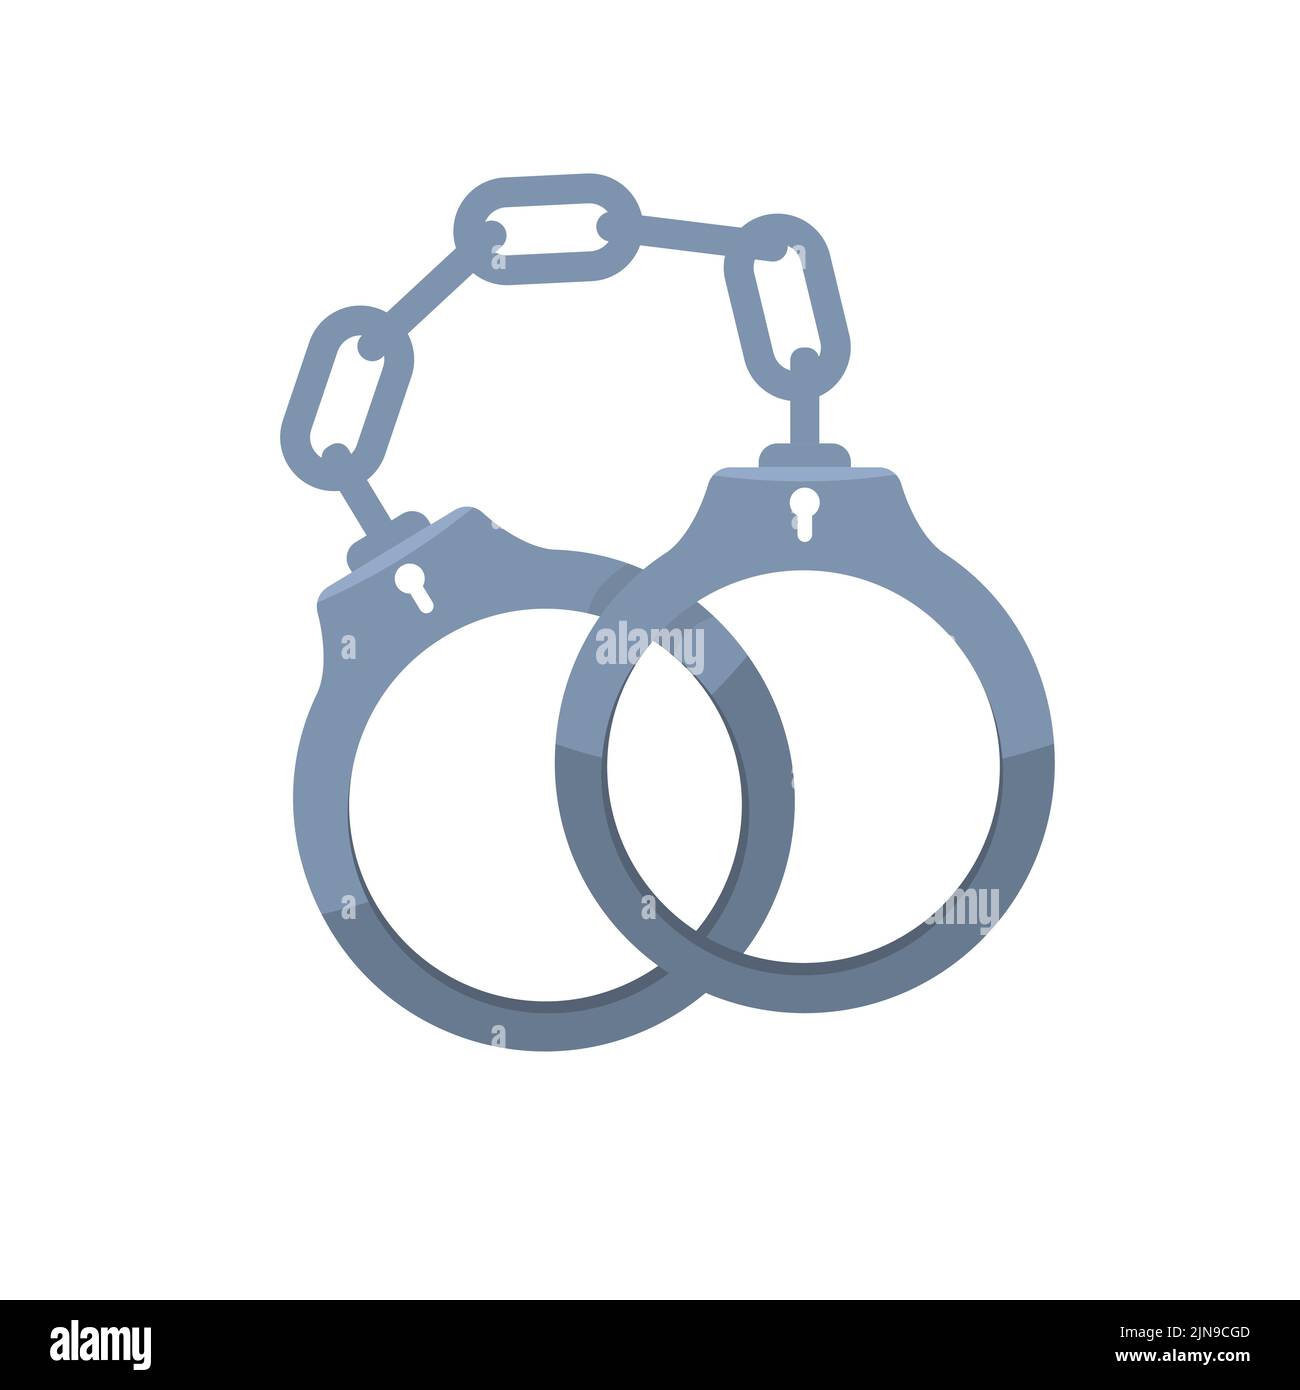 Handcuff icon or symbol for your design. Stock Vector